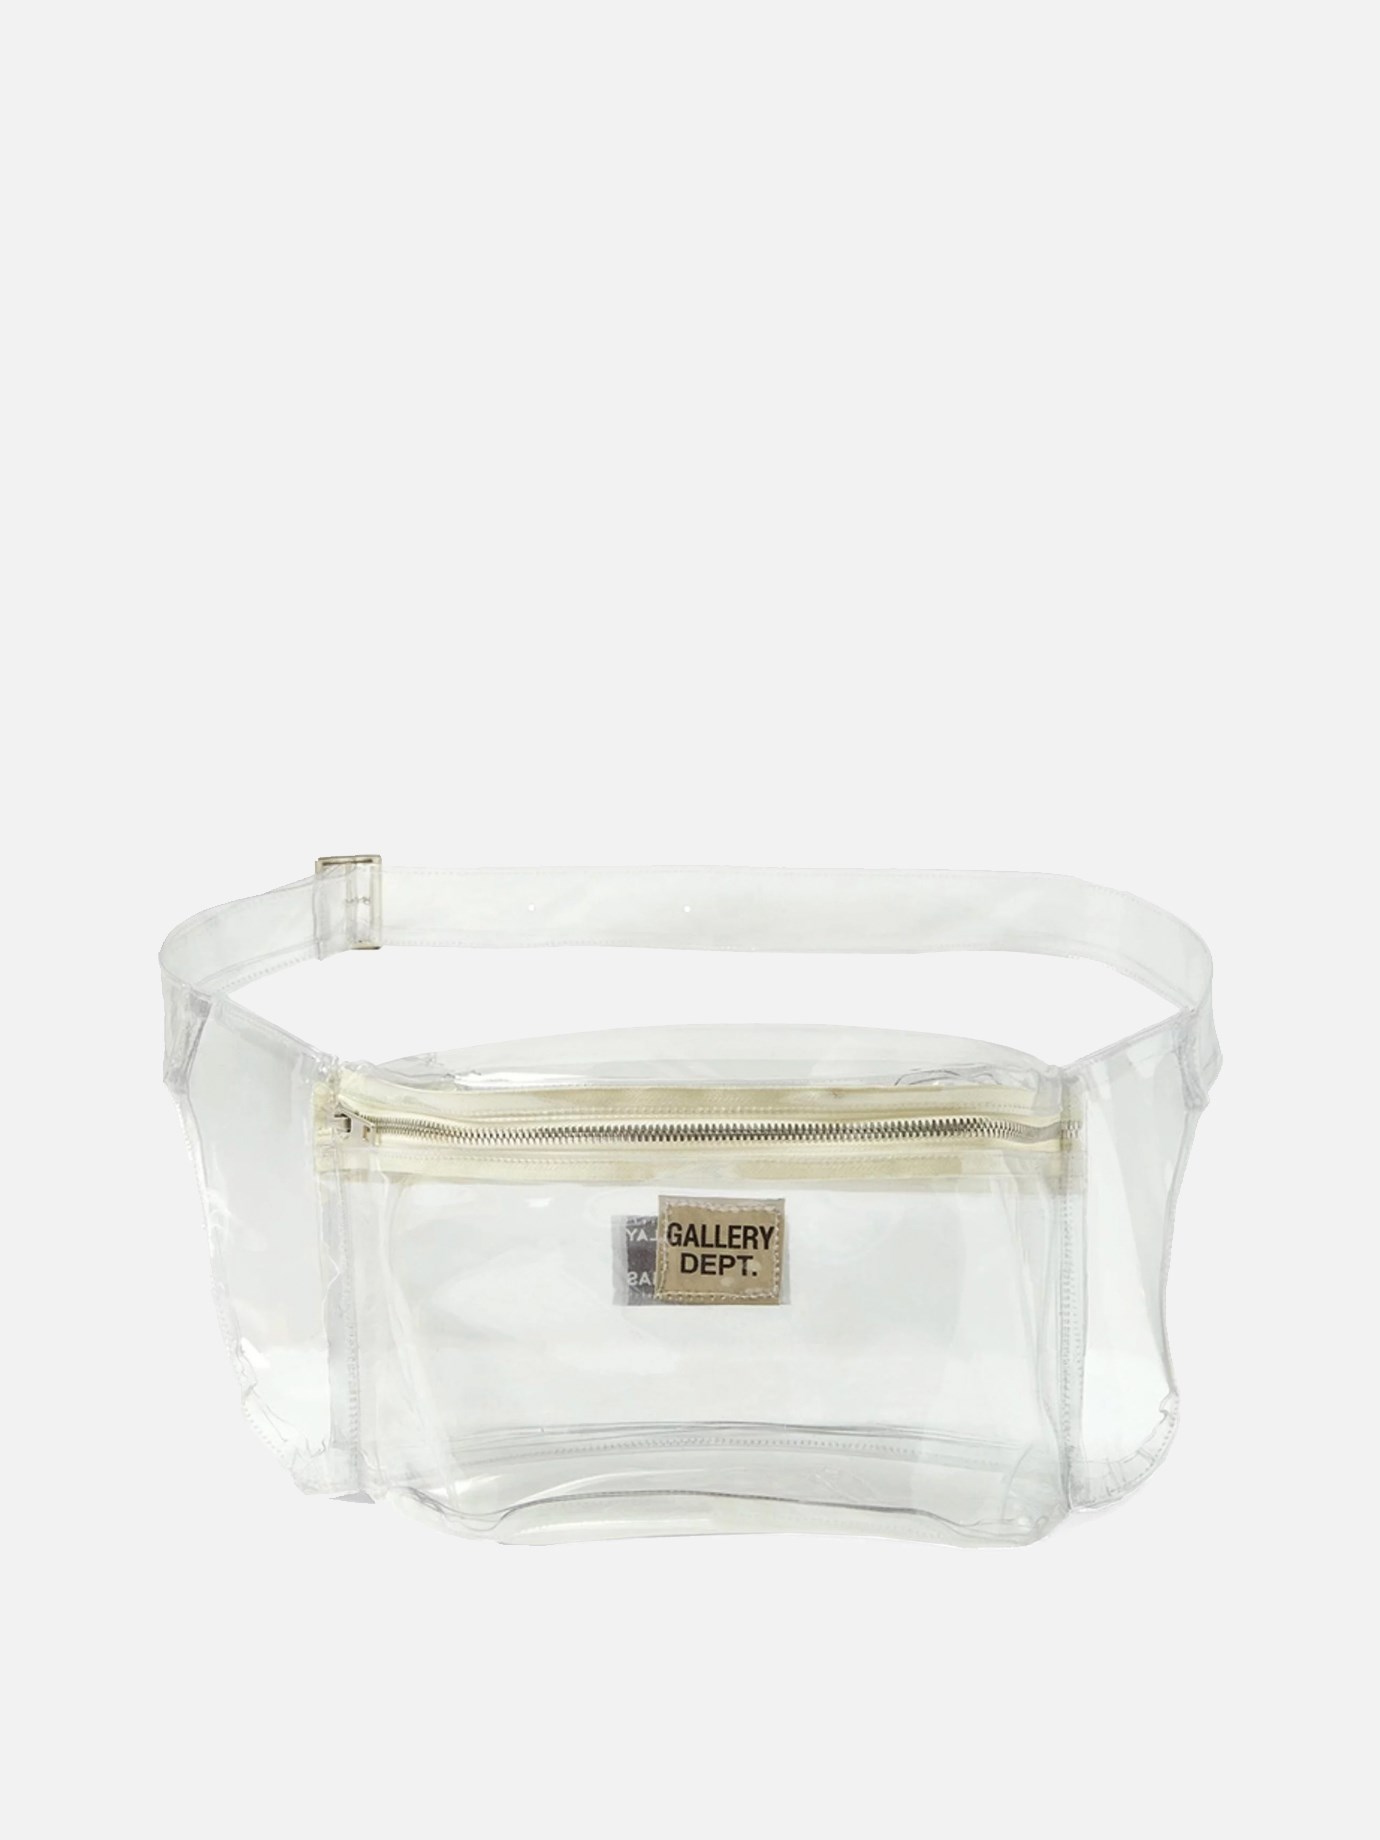  Clear  belt bagby Gallery Dept. - 2